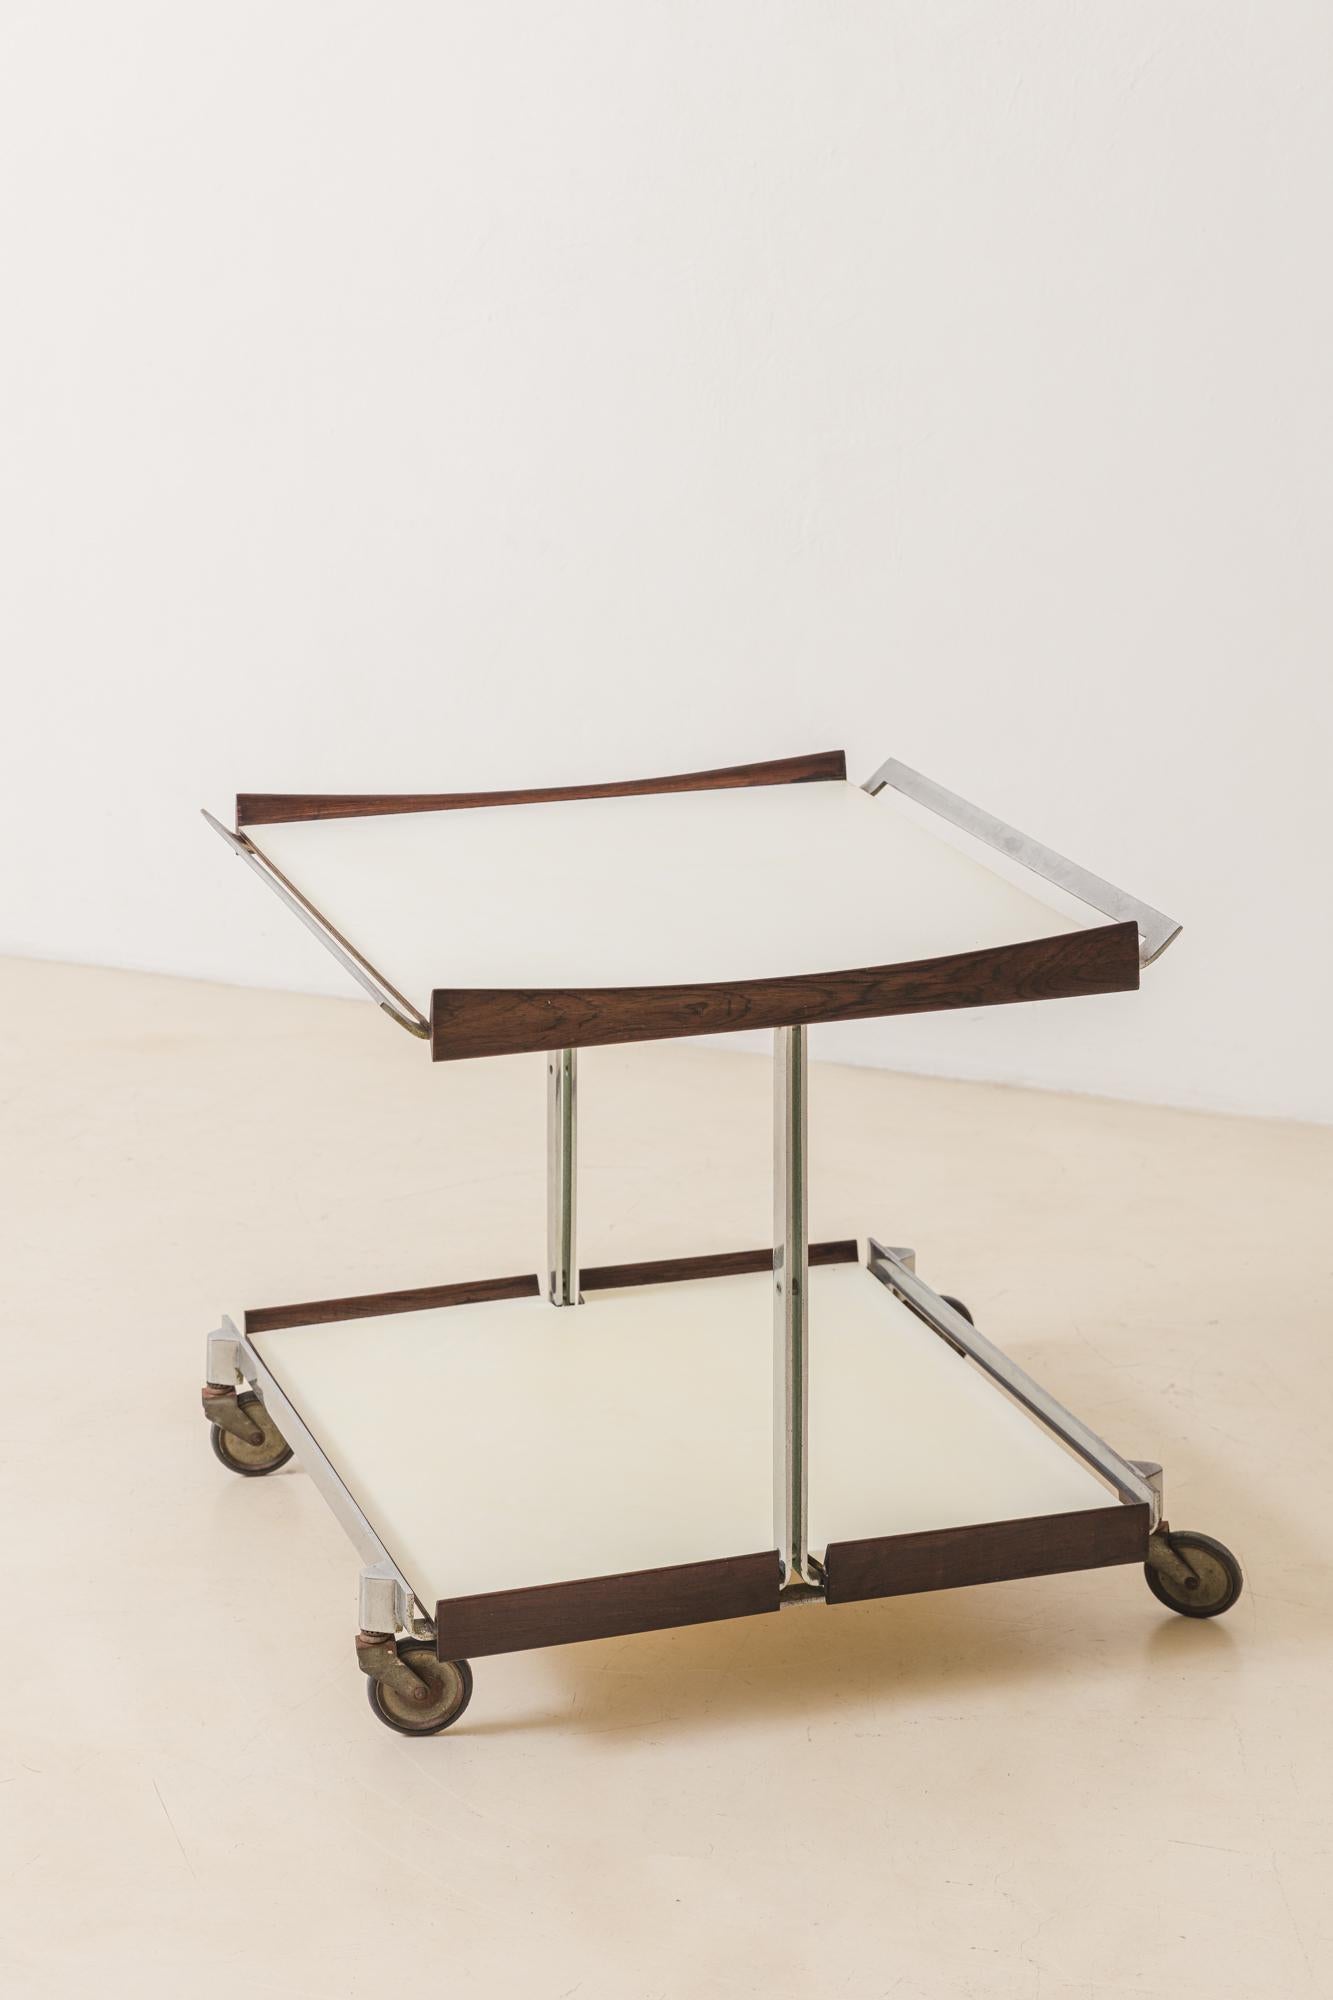 Mid-20th Century Bar Cart by Carlo Hauner and Martin Eisler, 1950s, Forma S.A., Brazilian design For Sale